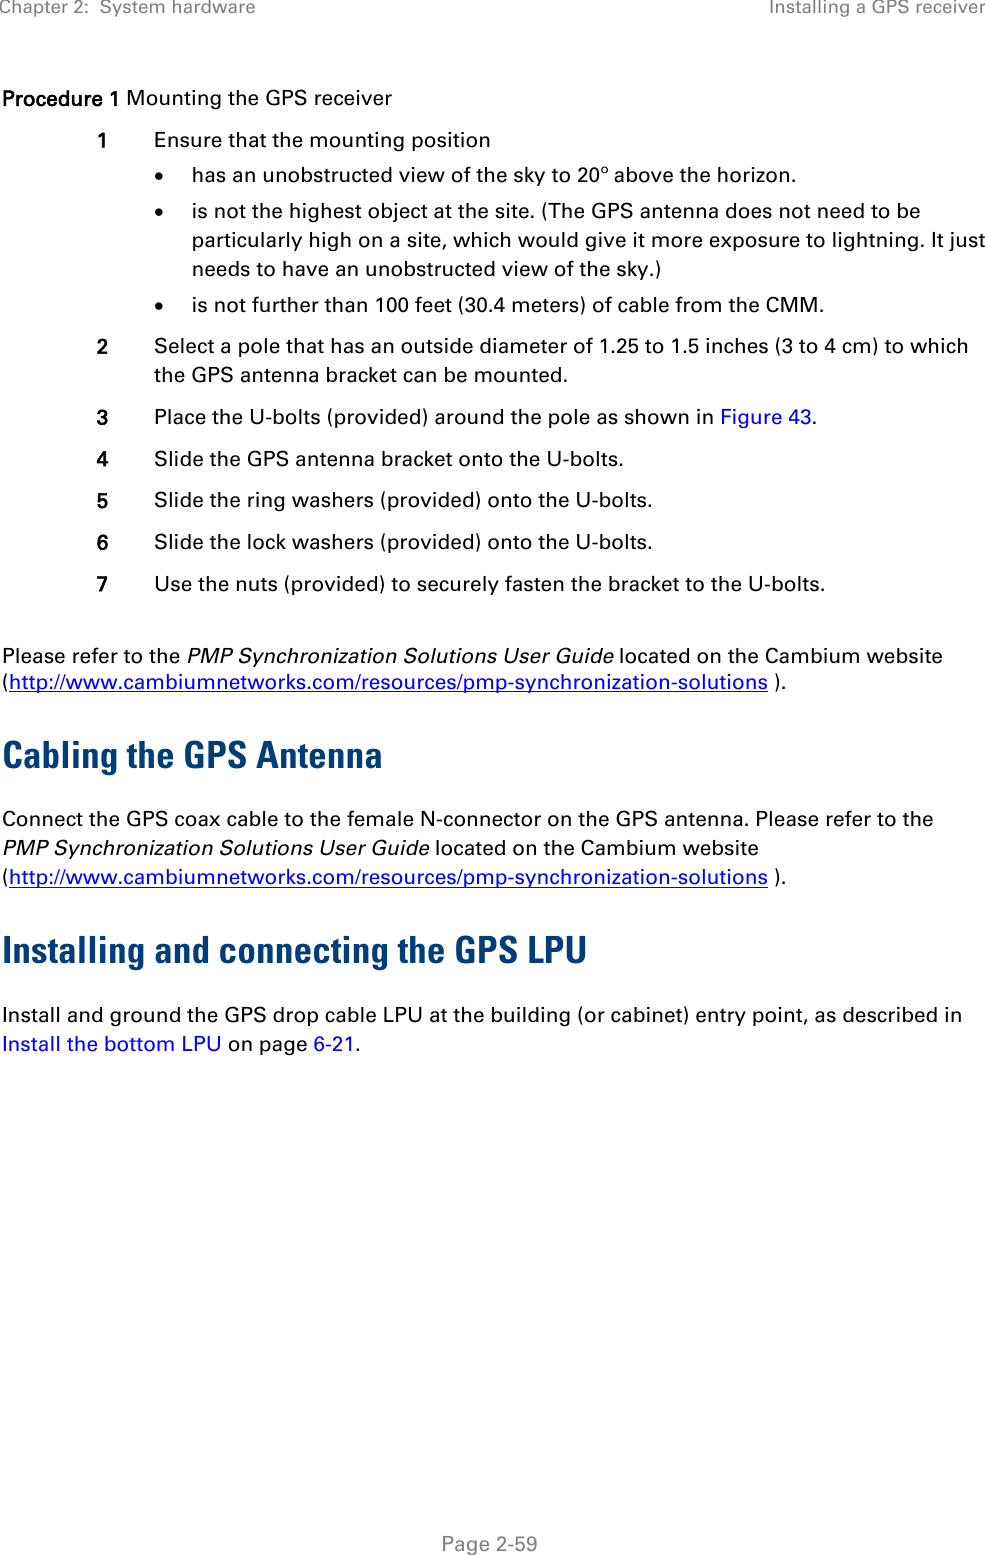 Chapter 2:  System hardware Installing a GPS receiver   Page 2-59 Procedure 1 Mounting the GPS receiver 1 Ensure that the mounting position • has an unobstructed view of the sky to 20º above the horizon. • is not the highest object at the site. (The GPS antenna does not need to be particularly high on a site, which would give it more exposure to lightning. It just needs to have an unobstructed view of the sky.) • is not further than 100 feet (30.4 meters) of cable from the CMM. 2 Select a pole that has an outside diameter of 1.25 to 1.5 inches (3 to 4 cm) to which the GPS antenna bracket can be mounted. 3 Place the U-bolts (provided) around the pole as shown in Figure 43. 4 Slide the GPS antenna bracket onto the U-bolts. 5 Slide the ring washers (provided) onto the U-bolts. 6 Slide the lock washers (provided) onto the U-bolts. 7 Use the nuts (provided) to securely fasten the bracket to the U-bolts.  Please refer to the PMP Synchronization Solutions User Guide located on the Cambium website (http://www.cambiumnetworks.com/resources/pmp-synchronization-solutions ). Cabling the GPS Antenna Connect the GPS coax cable to the female N-connector on the GPS antenna. Please refer to the PMP Synchronization Solutions User Guide located on the Cambium website (http://www.cambiumnetworks.com/resources/pmp-synchronization-solutions ). Installing and connecting the GPS LPU Install and ground the GPS drop cable LPU at the building (or cabinet) entry point, as described in Install the bottom LPU on page 6-21.  